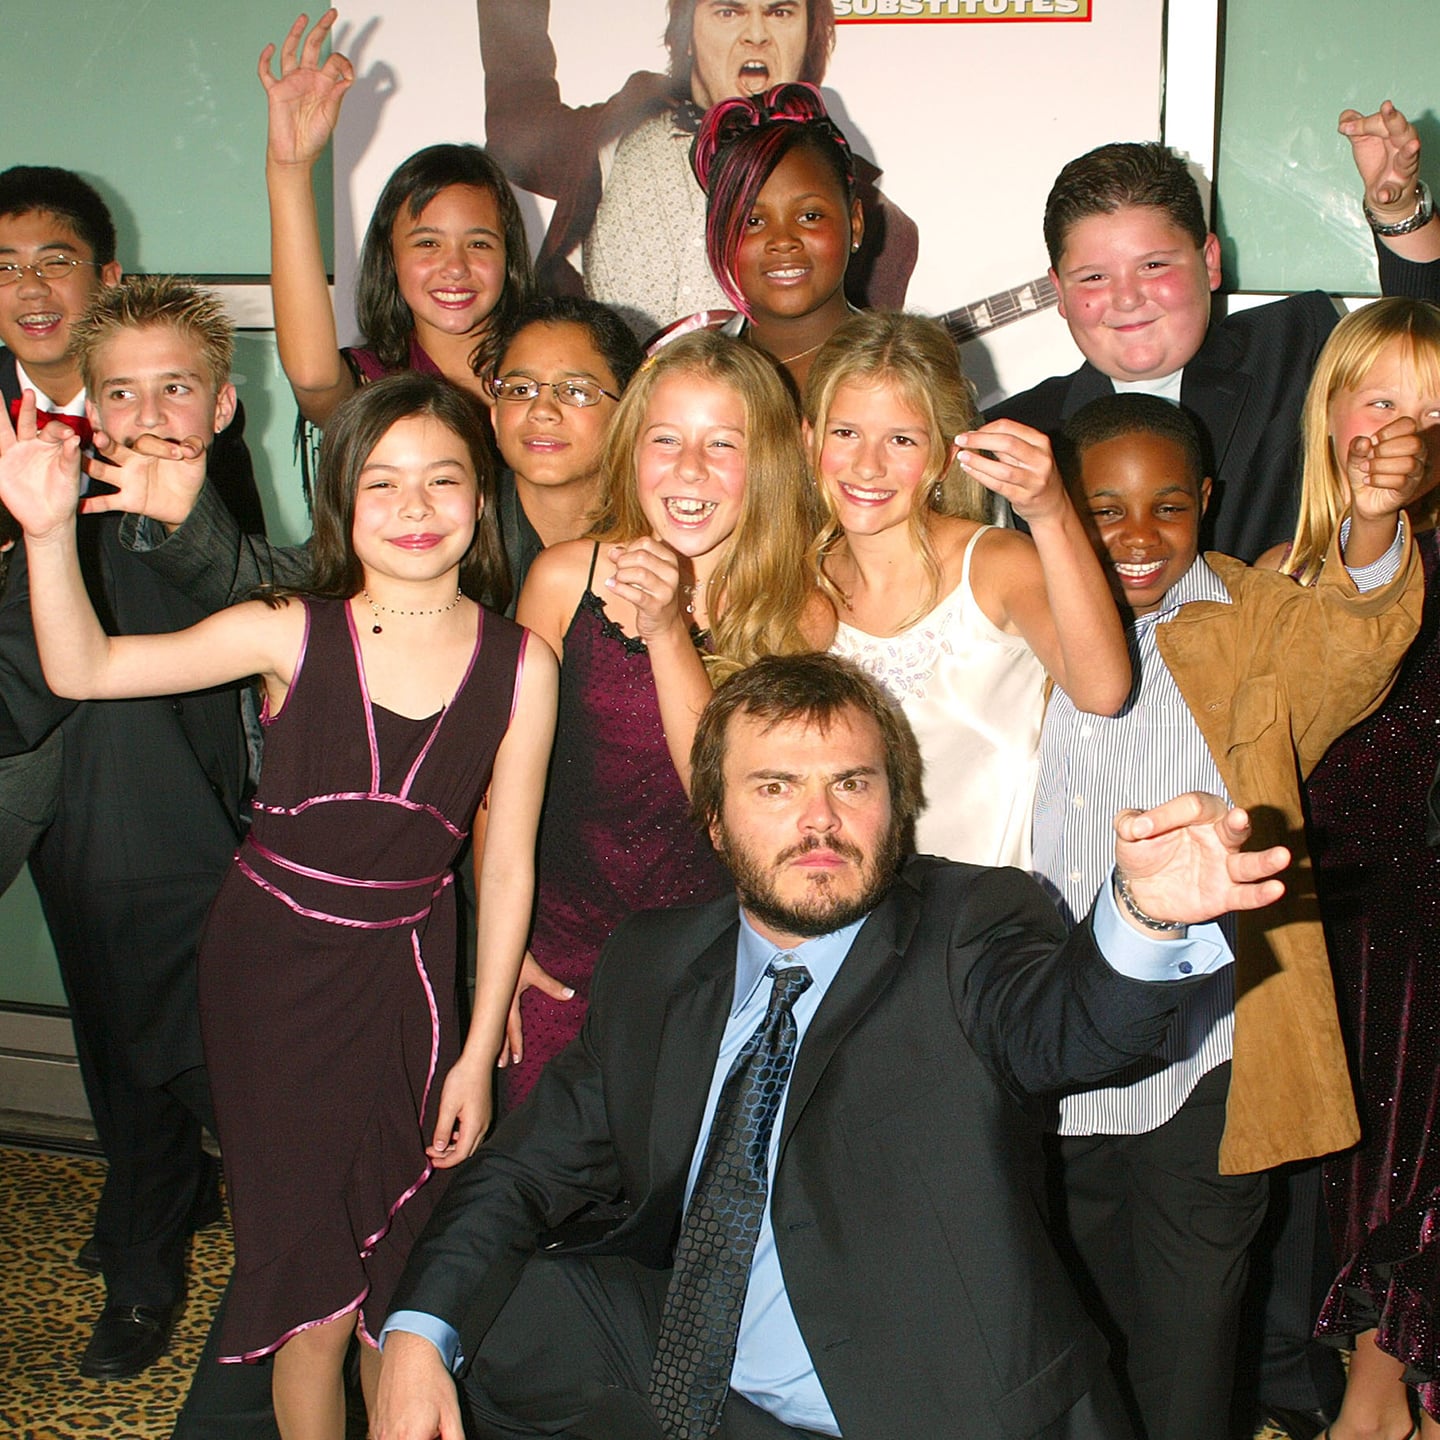 The Cast of School of Rock: Where Are They Now?